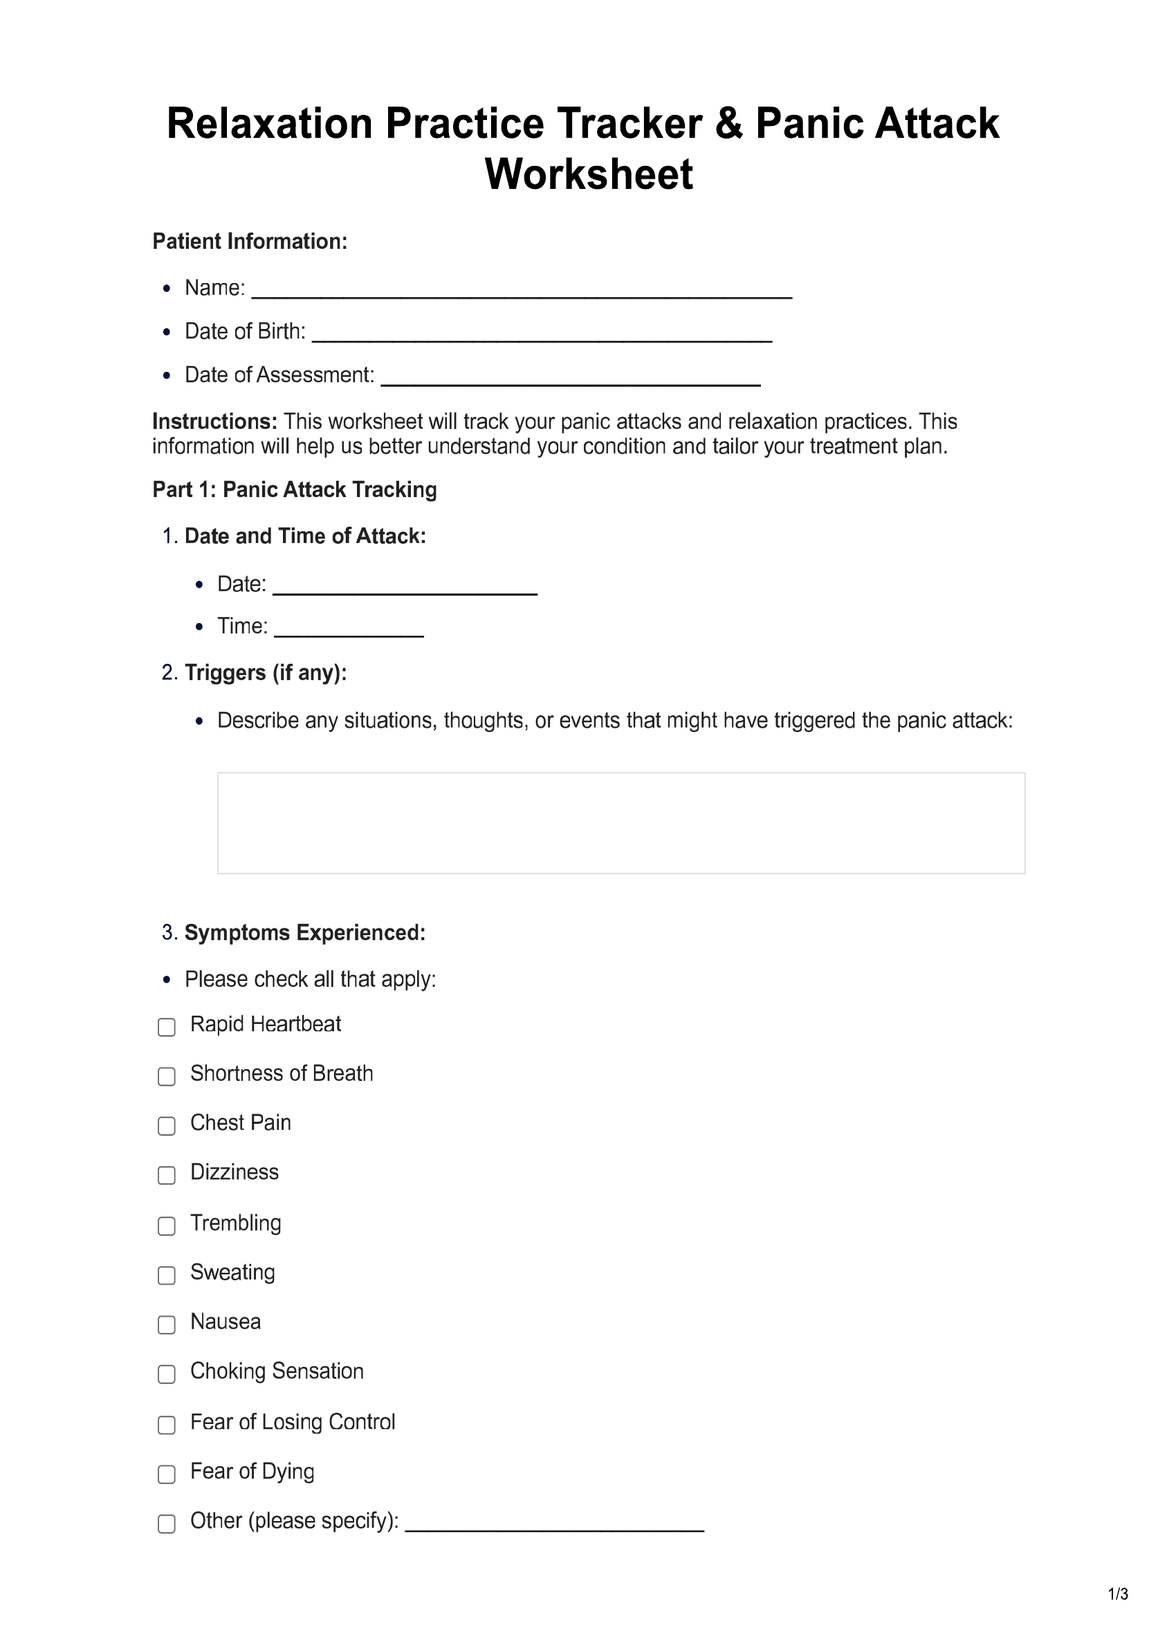 Relaxation Practice Tracker Panic Attack Worksheet PDF Example